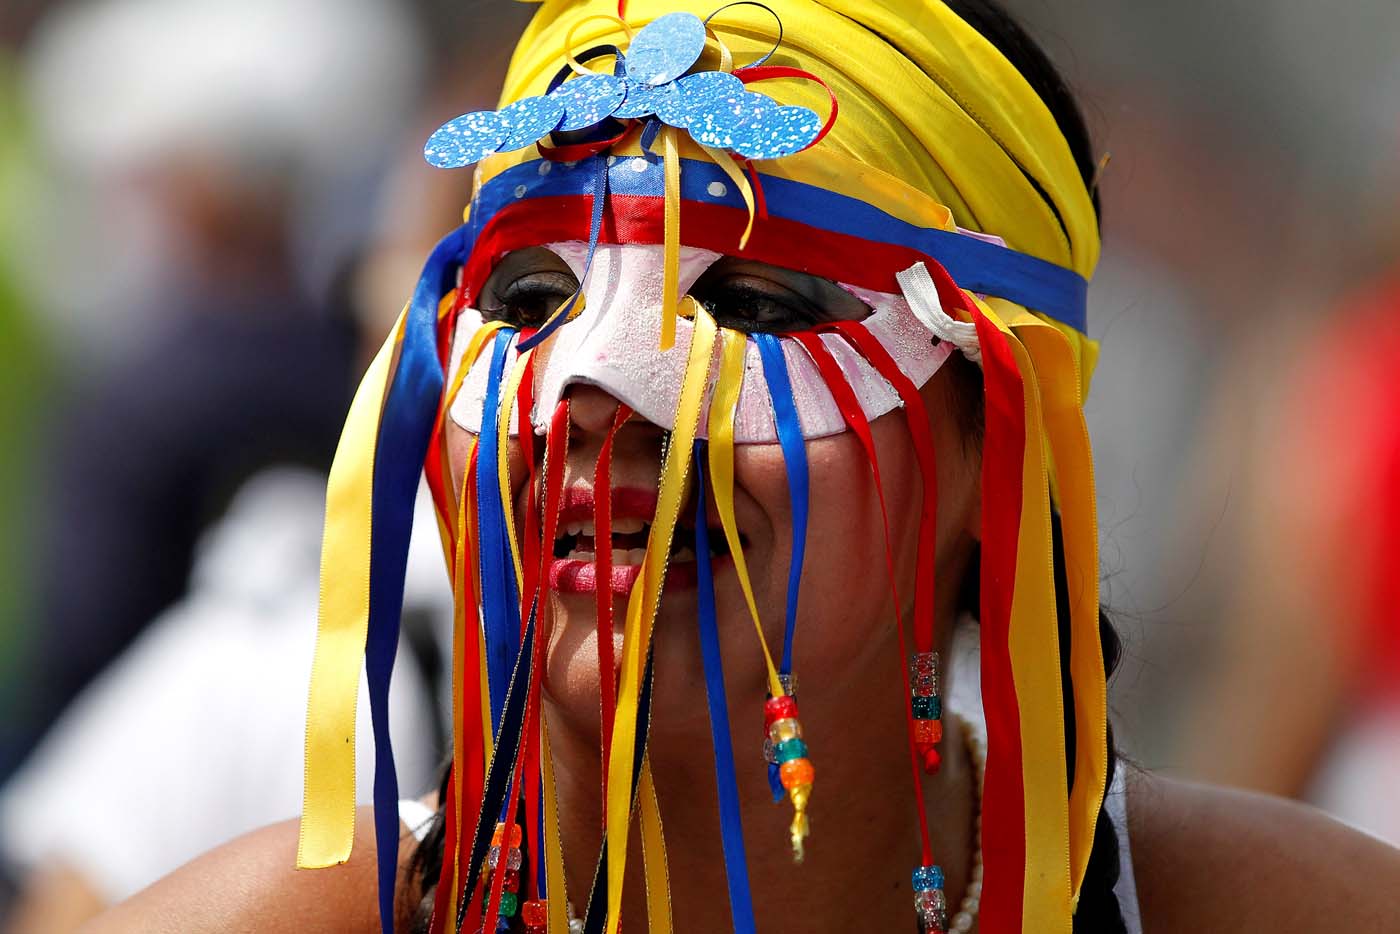 A woman wears a mask during a women's march to protest against President Nicolas Maduro's government in Caracas, Venezuela May 6, 2017. REUTERS/Christian Veron